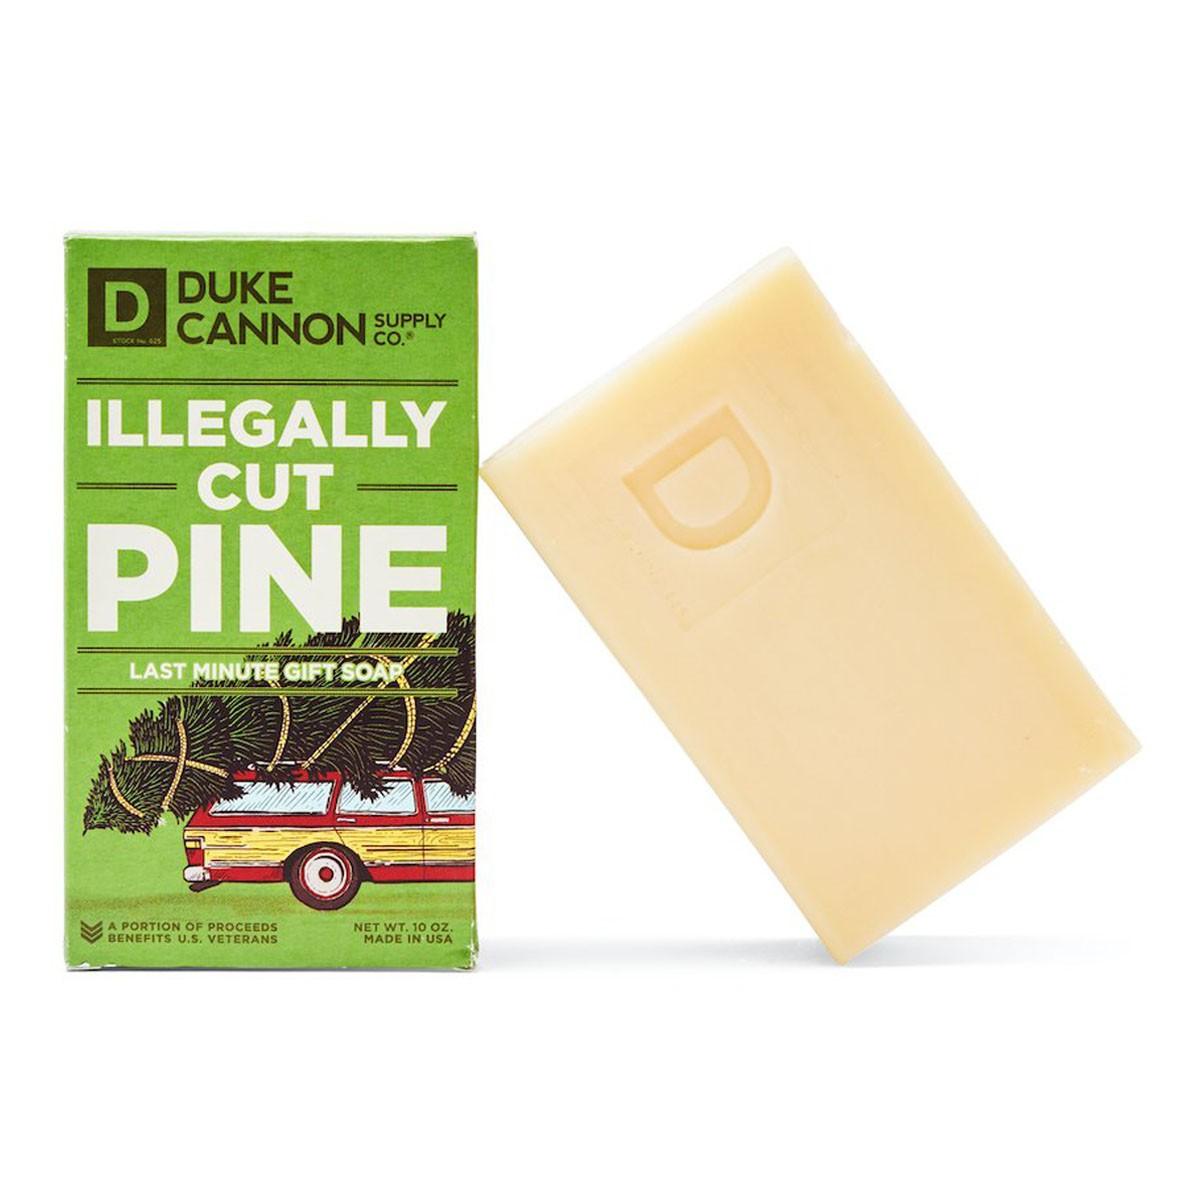 lllegally Cut Pine Soap - Purpose-Built / Home of the Trades